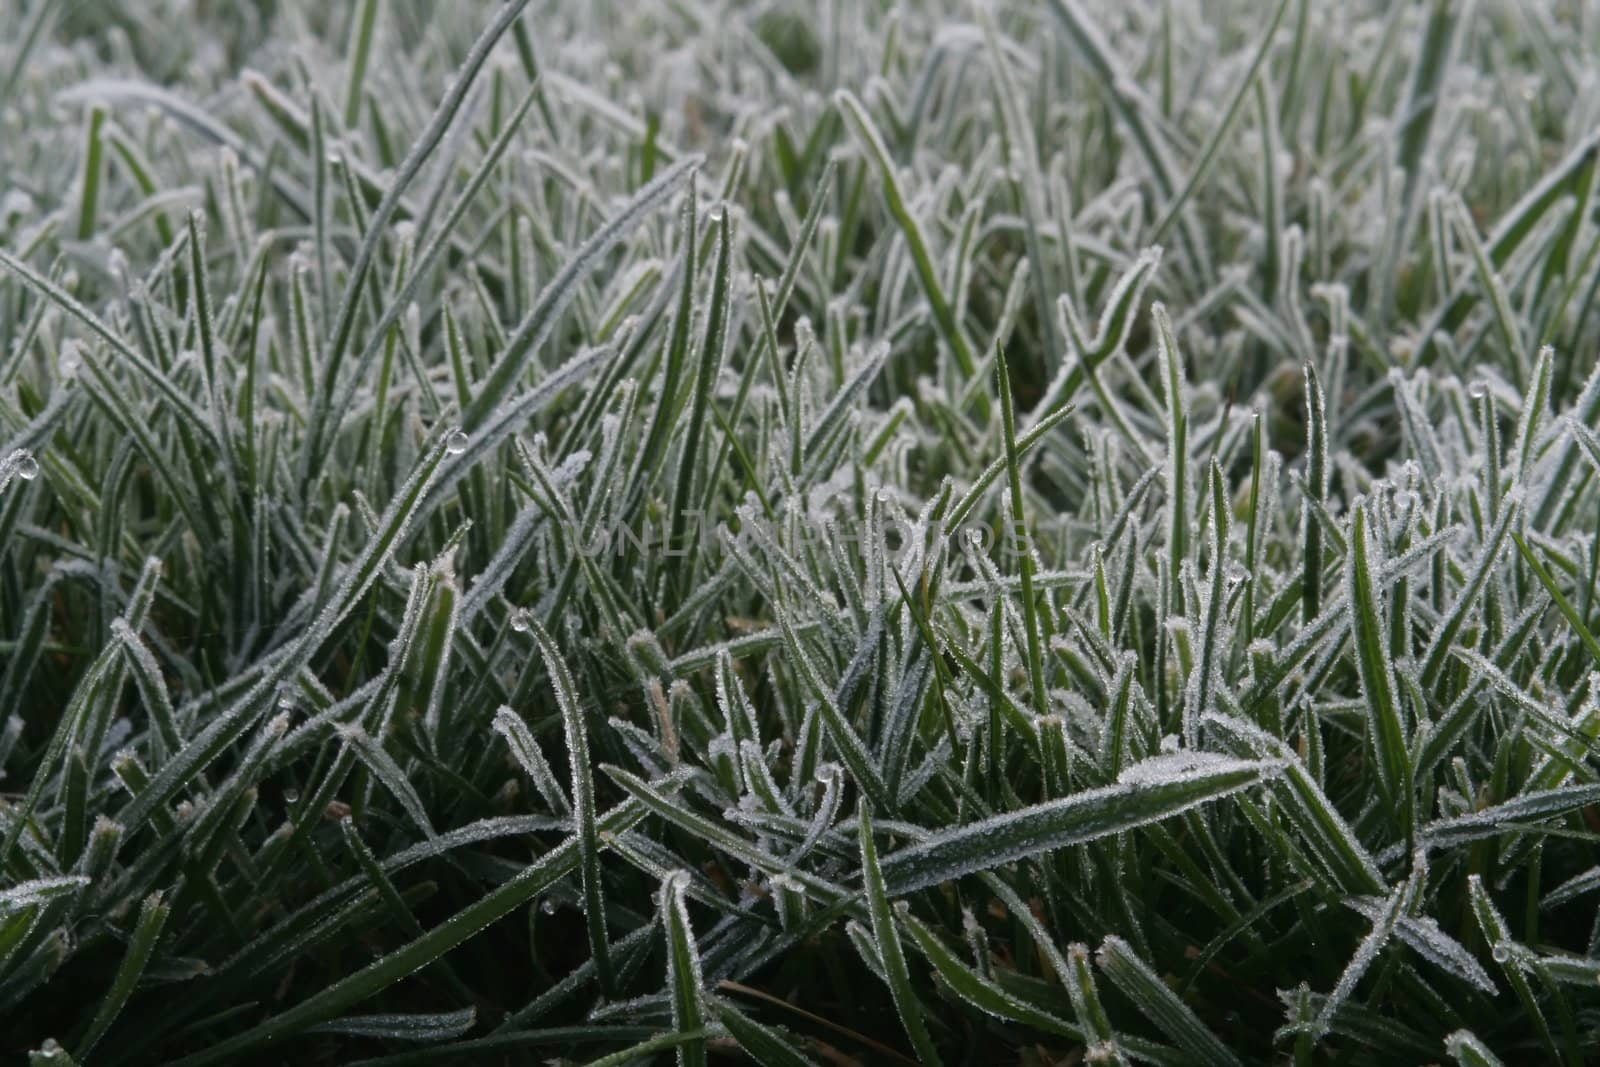 Blades of grass covered in the morning frost.